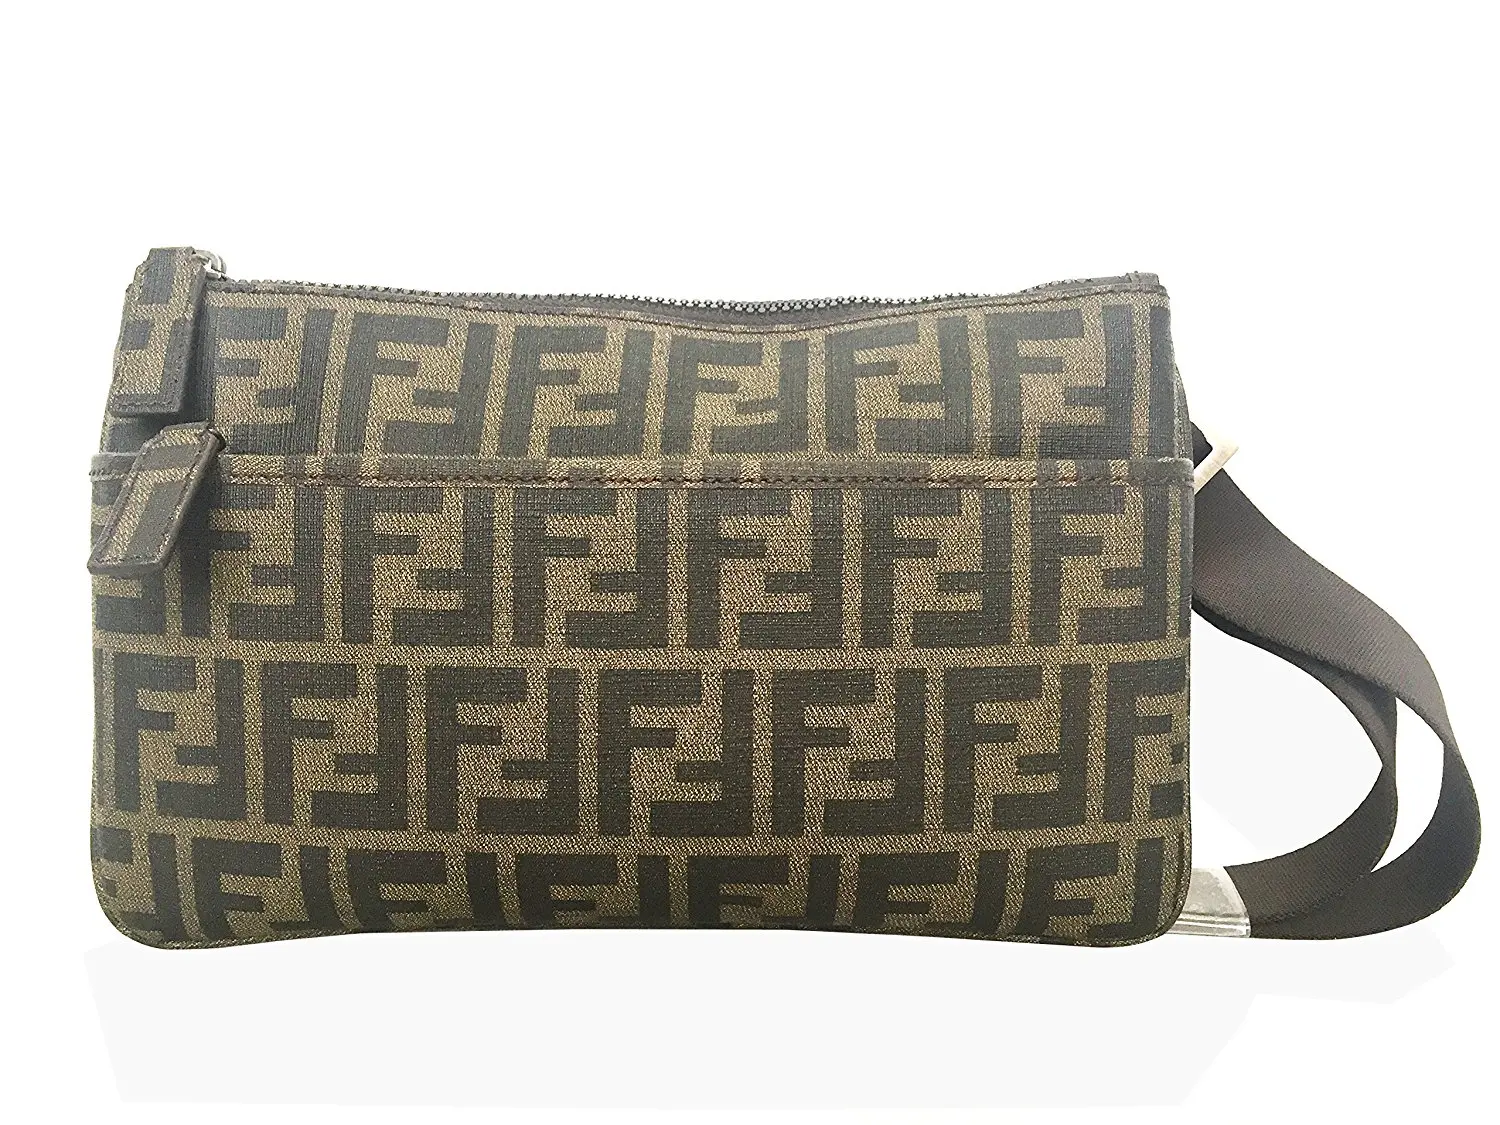 Cheap Fendi Bag Prices, find Fendi Bag Prices deals on line at Alibaba.com